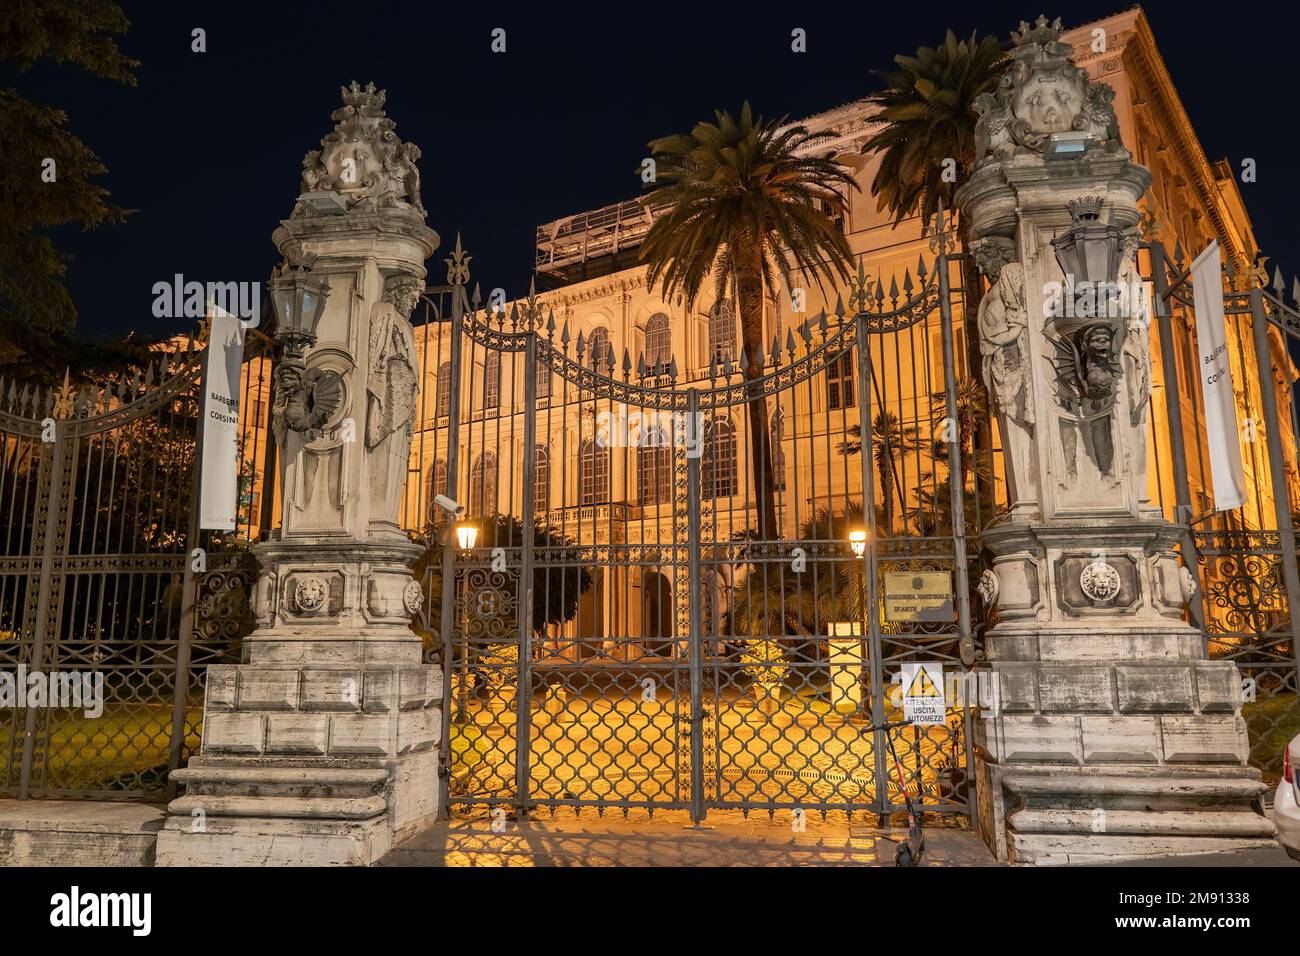 Rome, Italy, gate to the Barberini Palace (Palazzo Barberini) at night, housing National Gallery of Ancient Art (Galleria Nazionale d'Arte Antica). Stock Photo